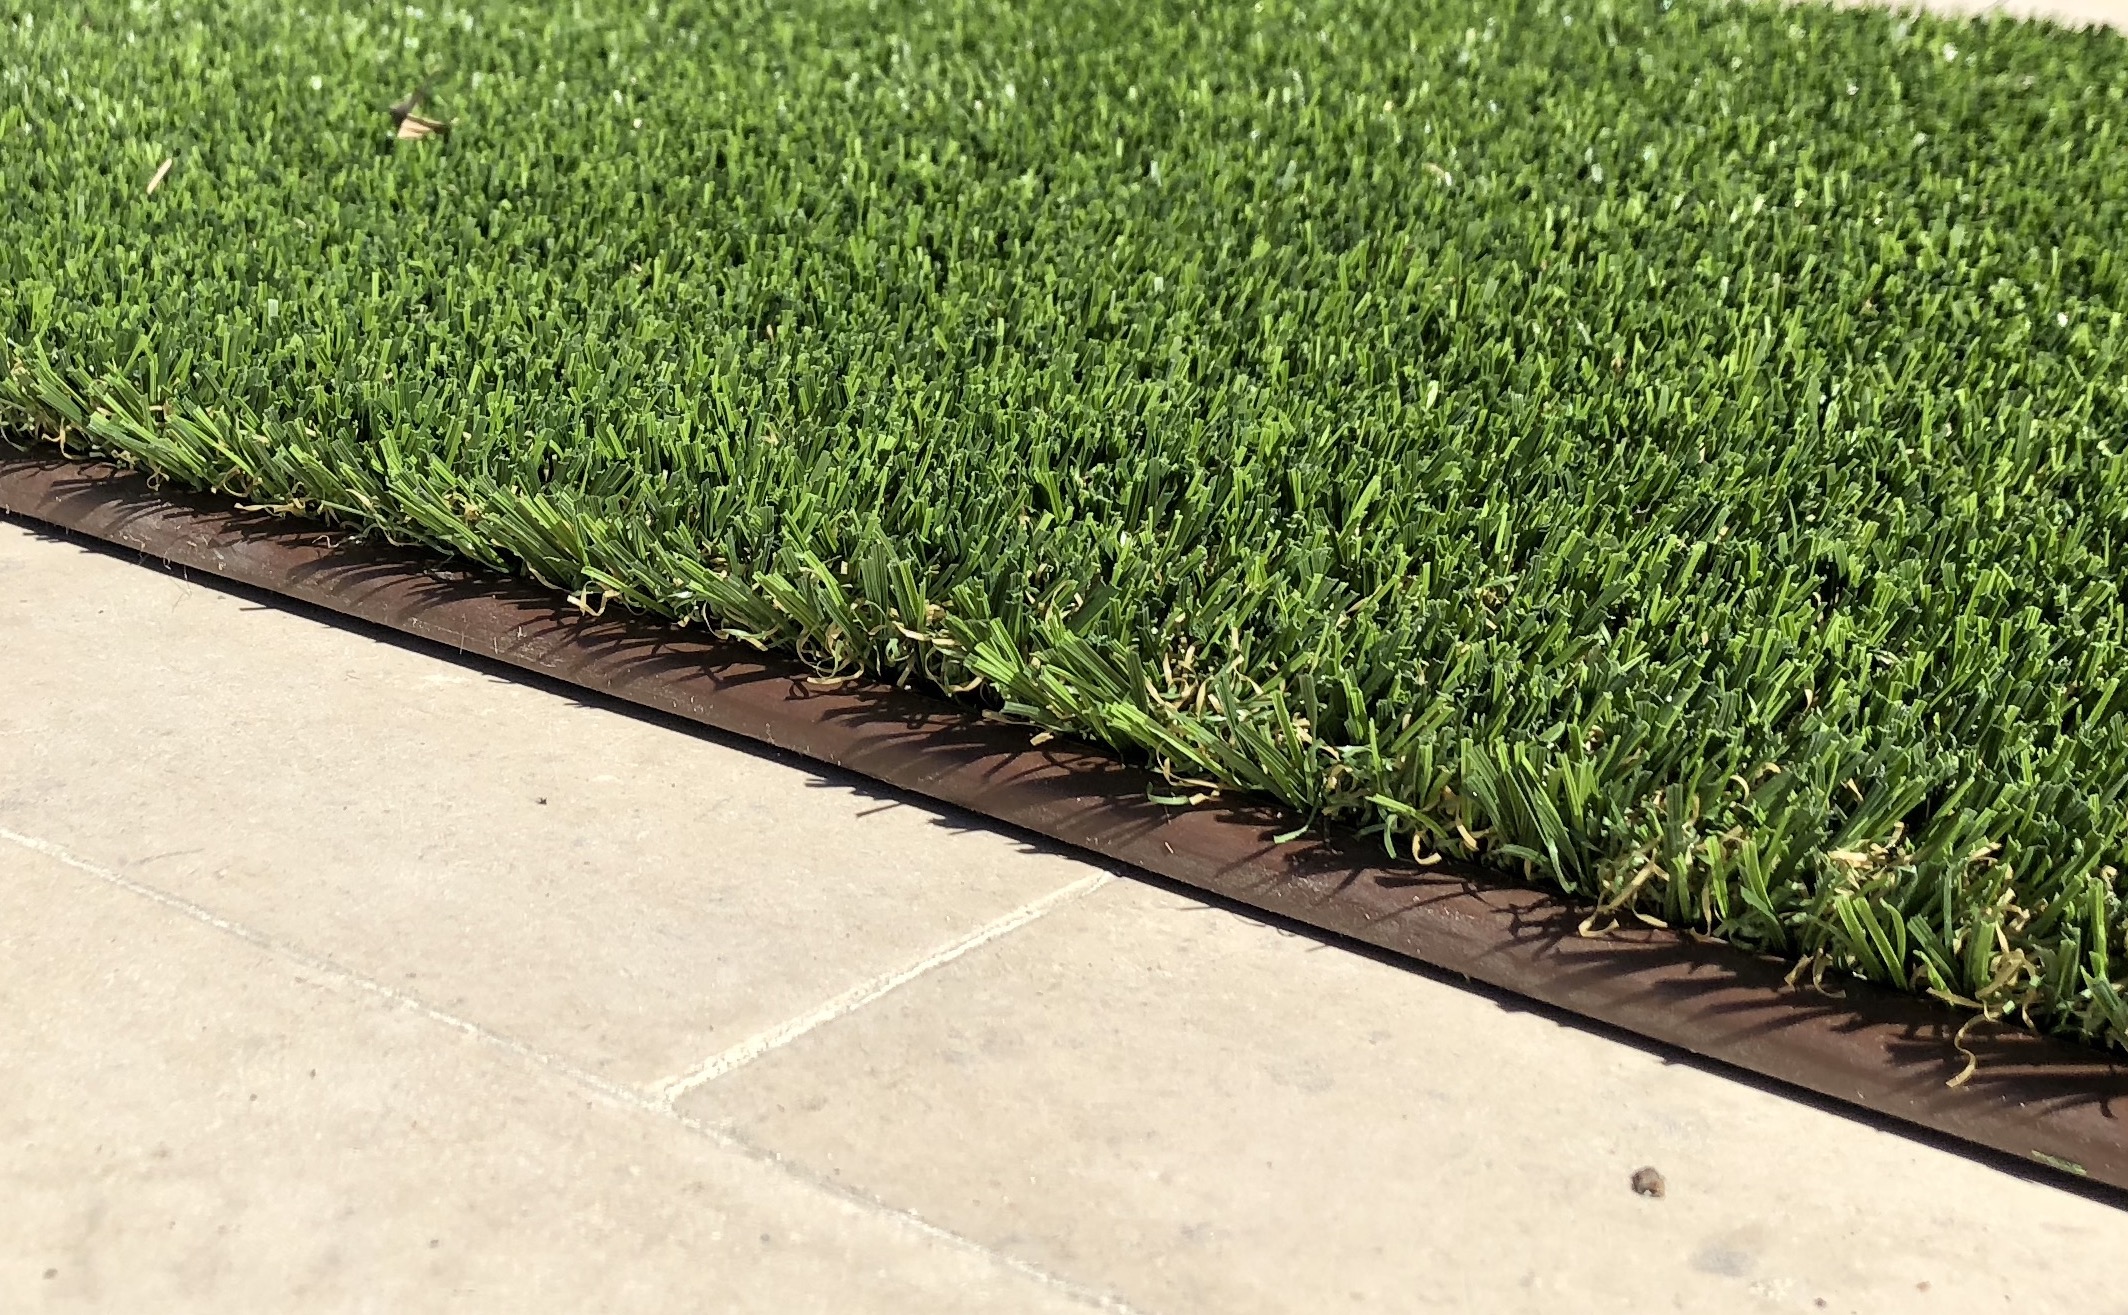 turf edging keeps pet turf in place on hard surfaces